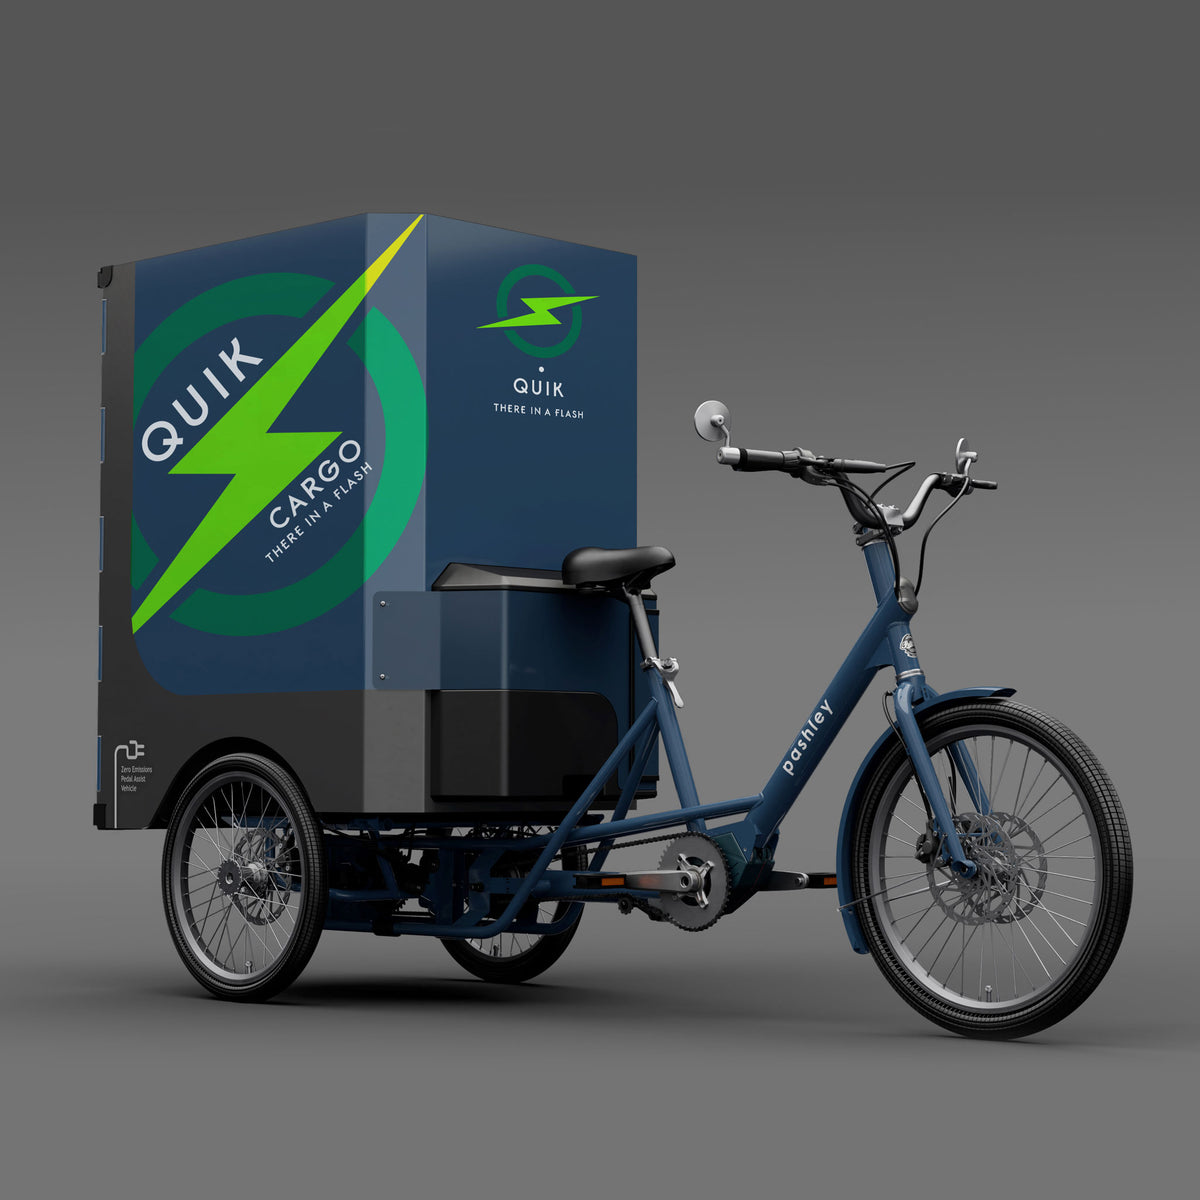 Blue electric cargo trike with quik cargo branding printed on the cargo box.